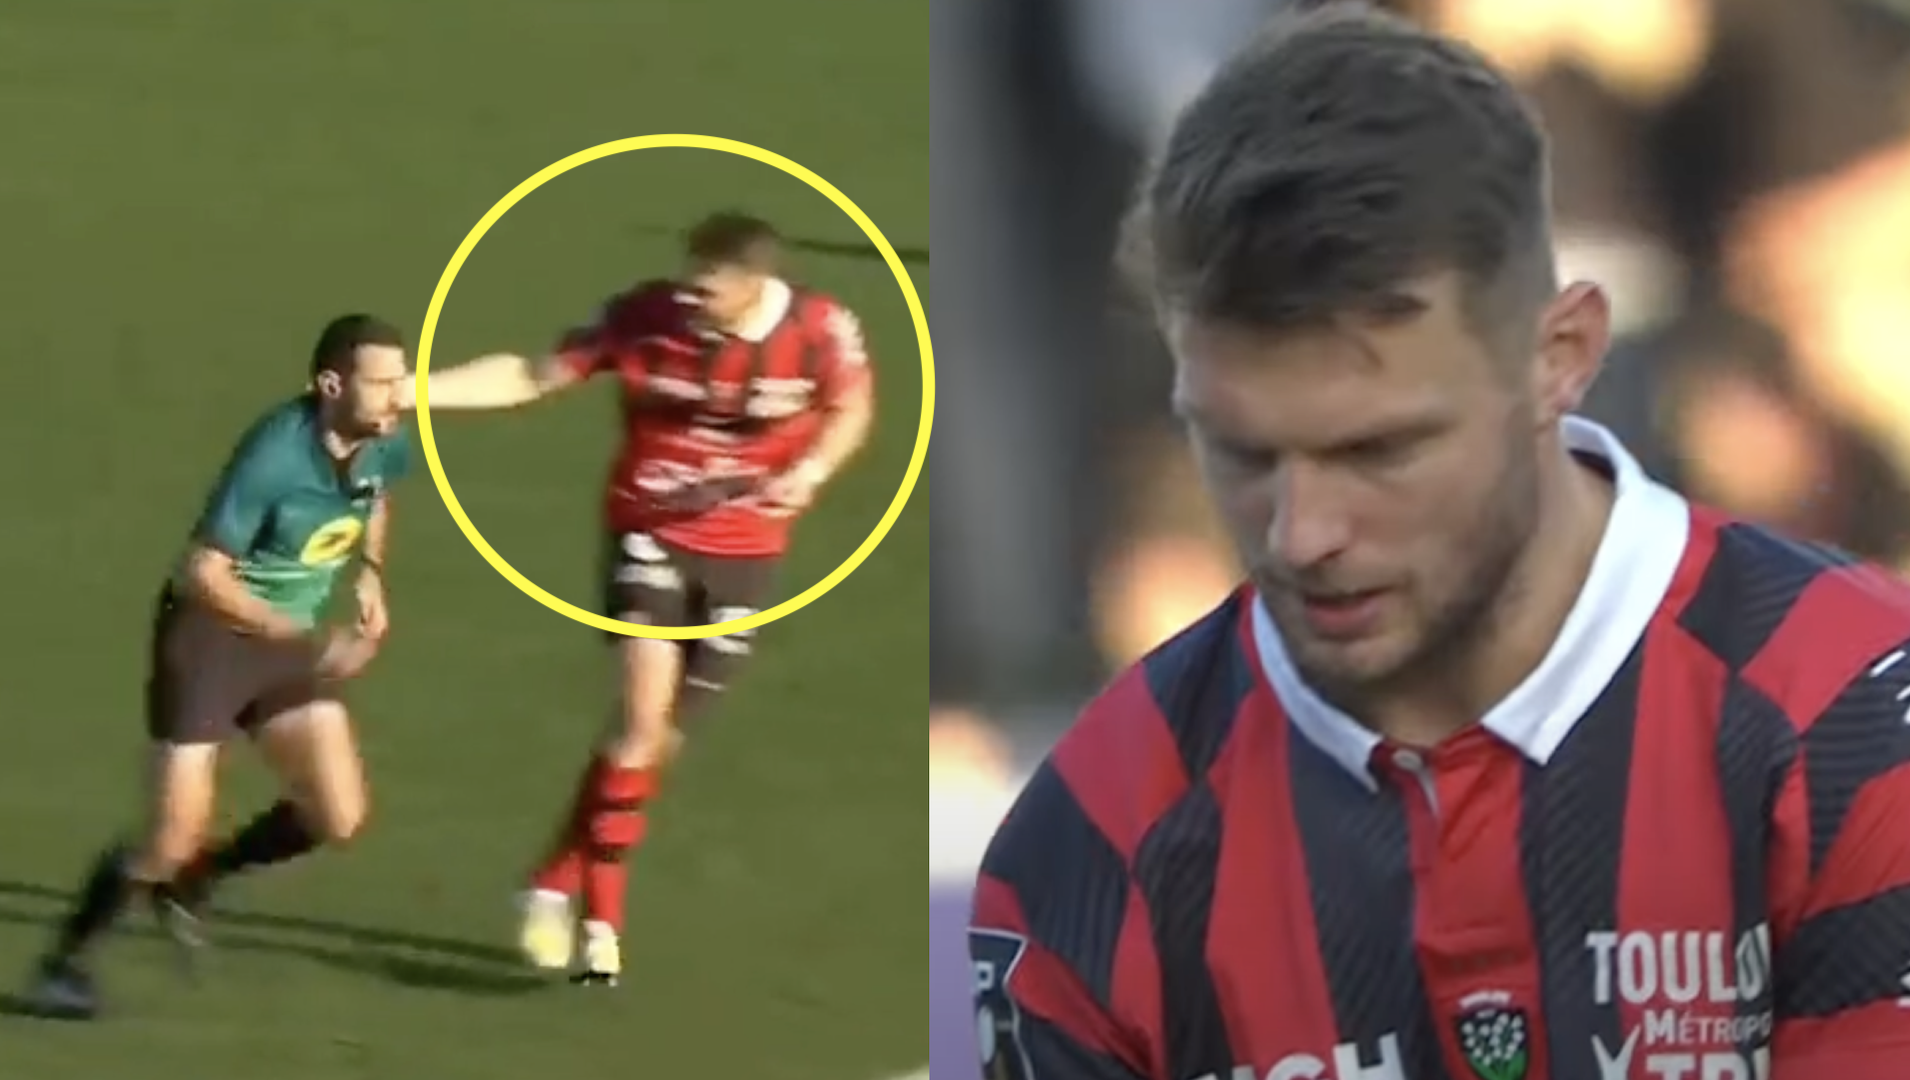 The real reason Dan Biggar has learned French has been exposed